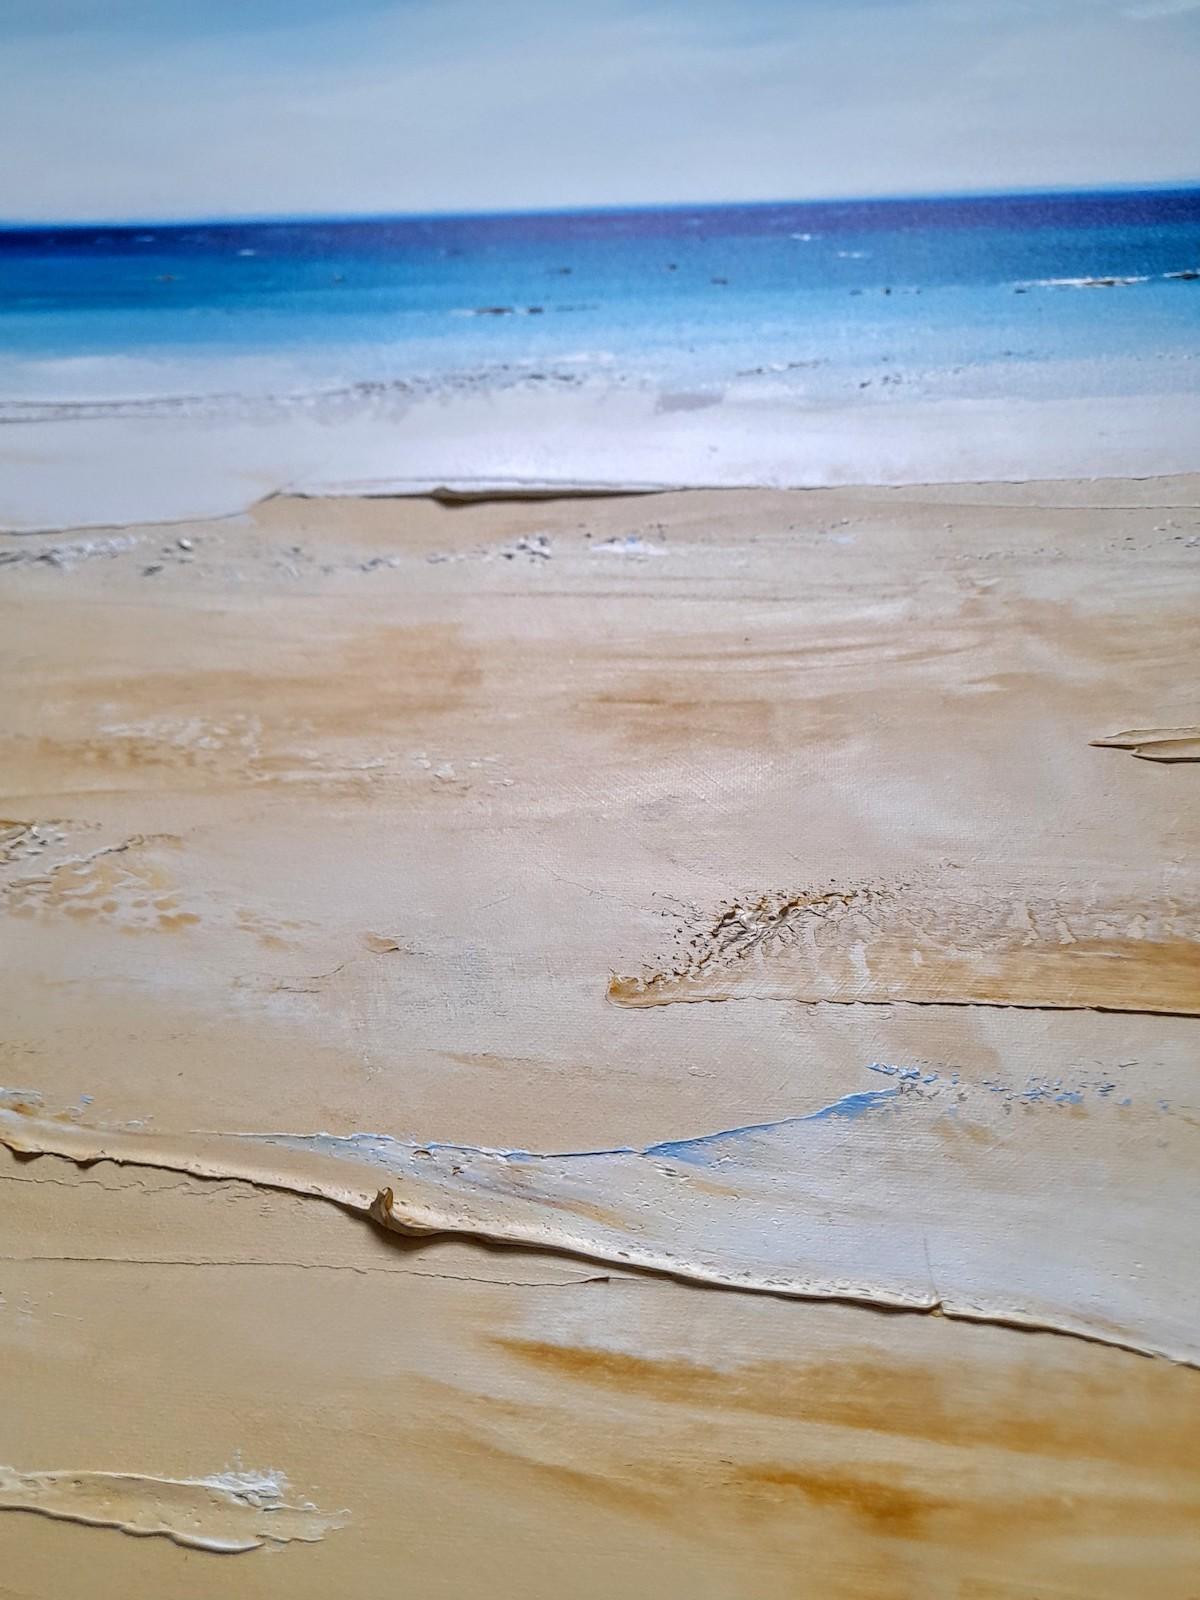 An original oil painting on fine cotton canvas portraying a beautiful summers day on the beach. The distant sea sparkles under the bright sky of the day while gentle waves make their way through the sea and over the sand into the foreground. The